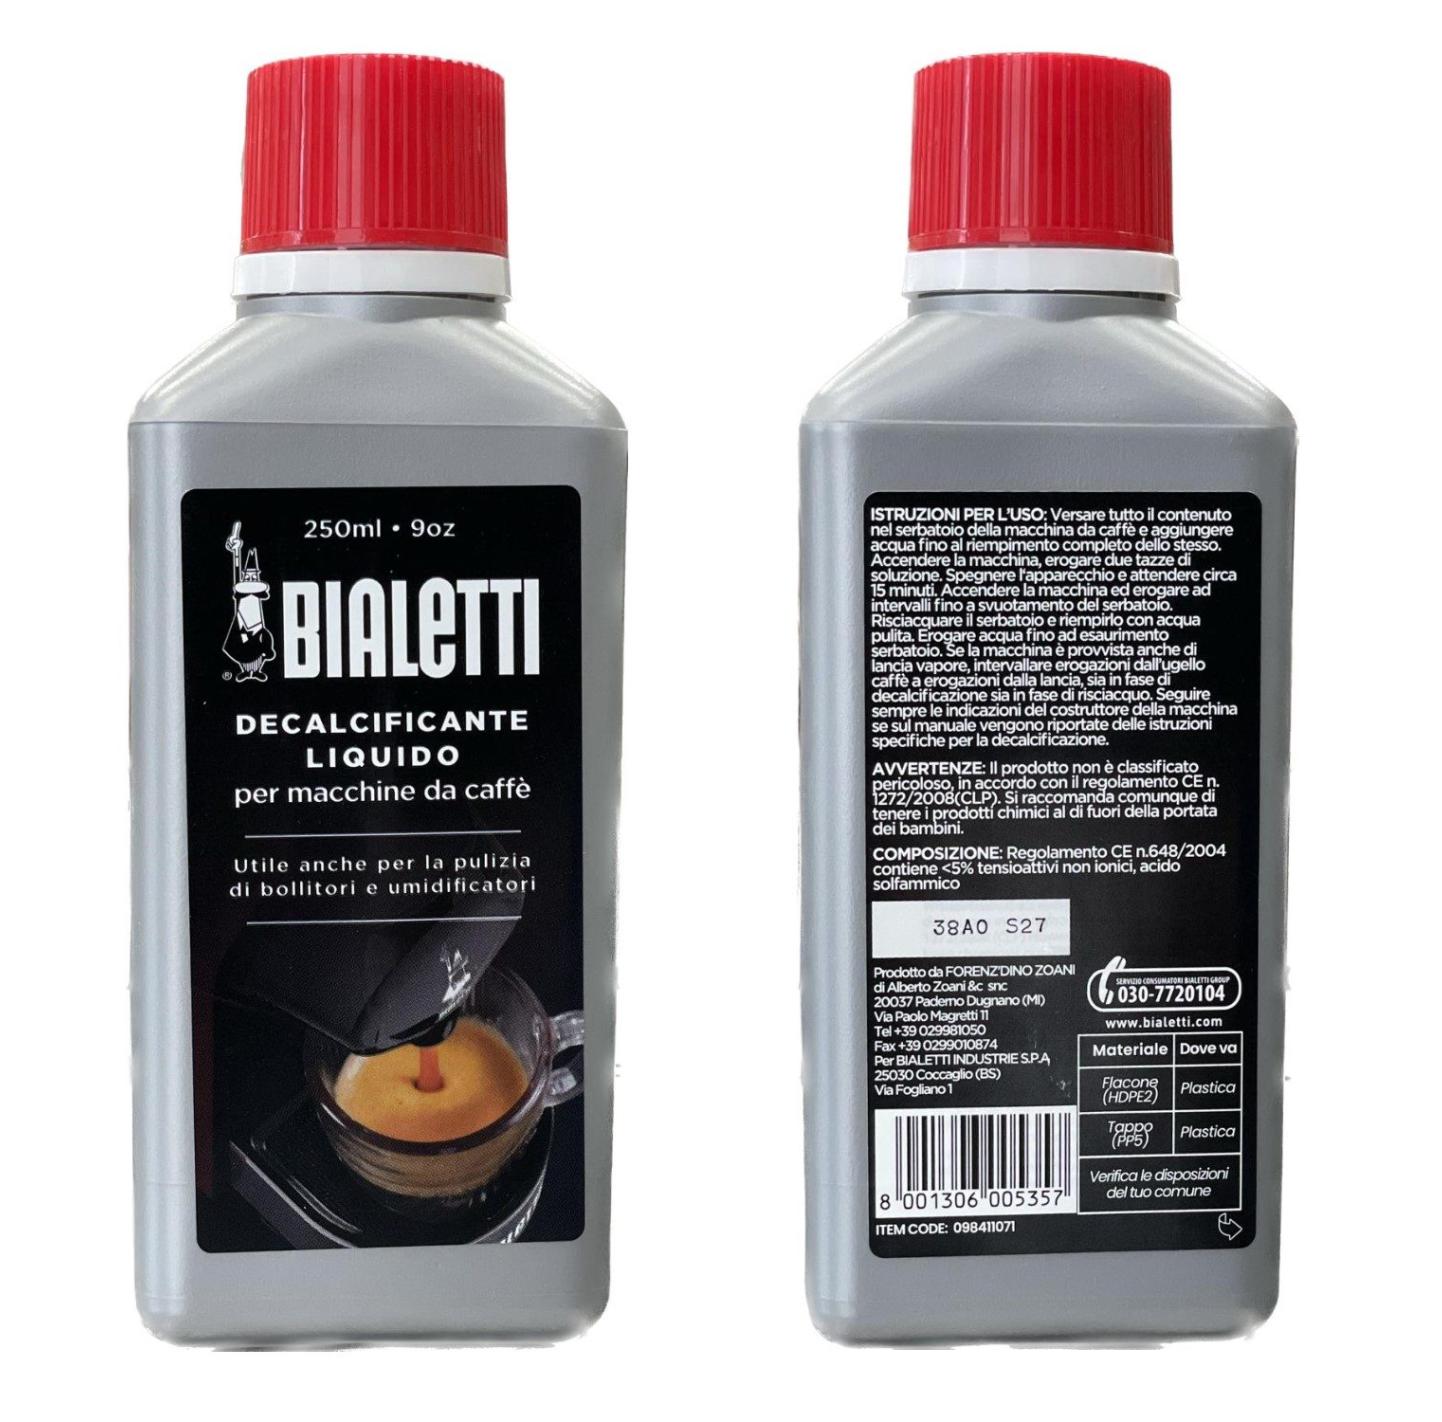 Bialetti descaling liquid: prevention and removal of limescale deposits  from coffee machines